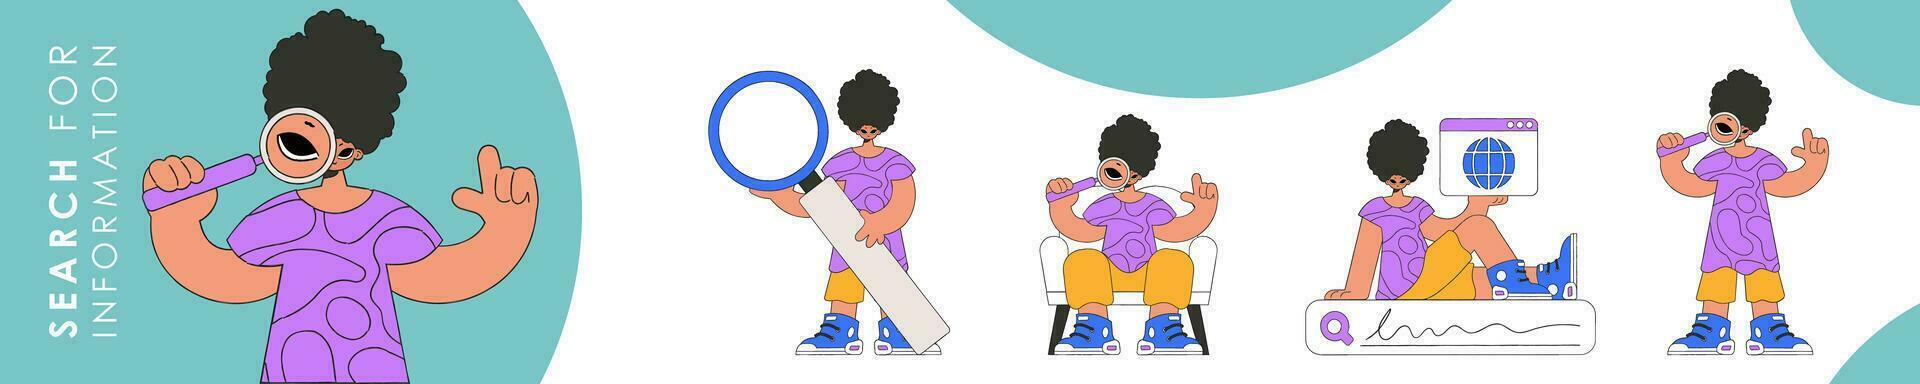 Set of character illustration for information search theme. Collection of scenes with a short guy holding a magnifying glass and looking for information. Retro style character. vector